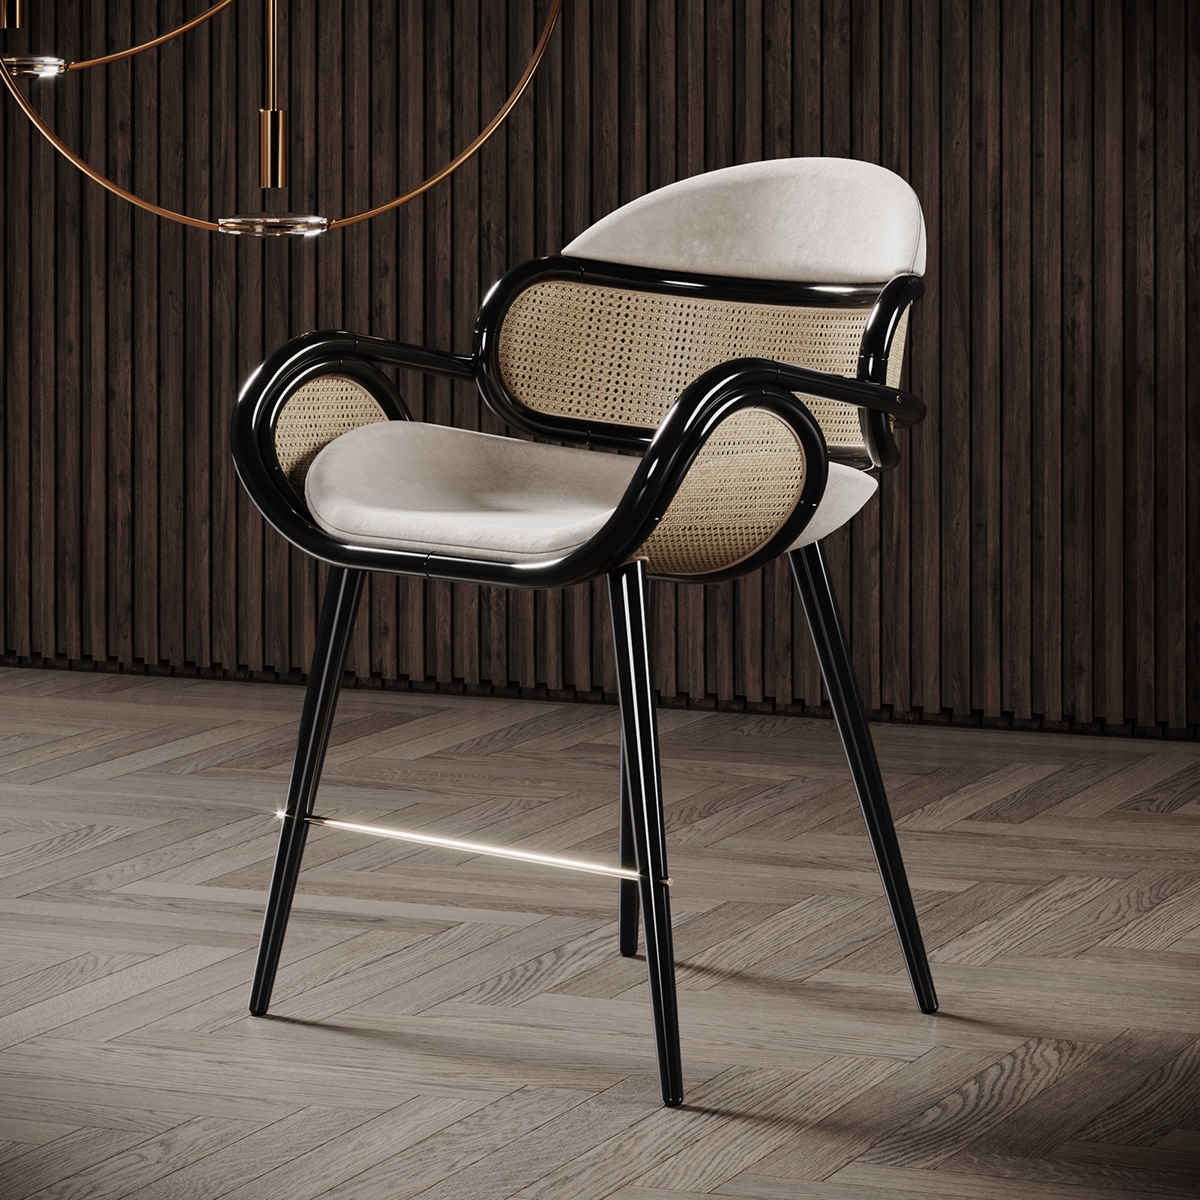 3d modeling 3ds max chair chair design chairs contemporary furniture modern product design  rattan